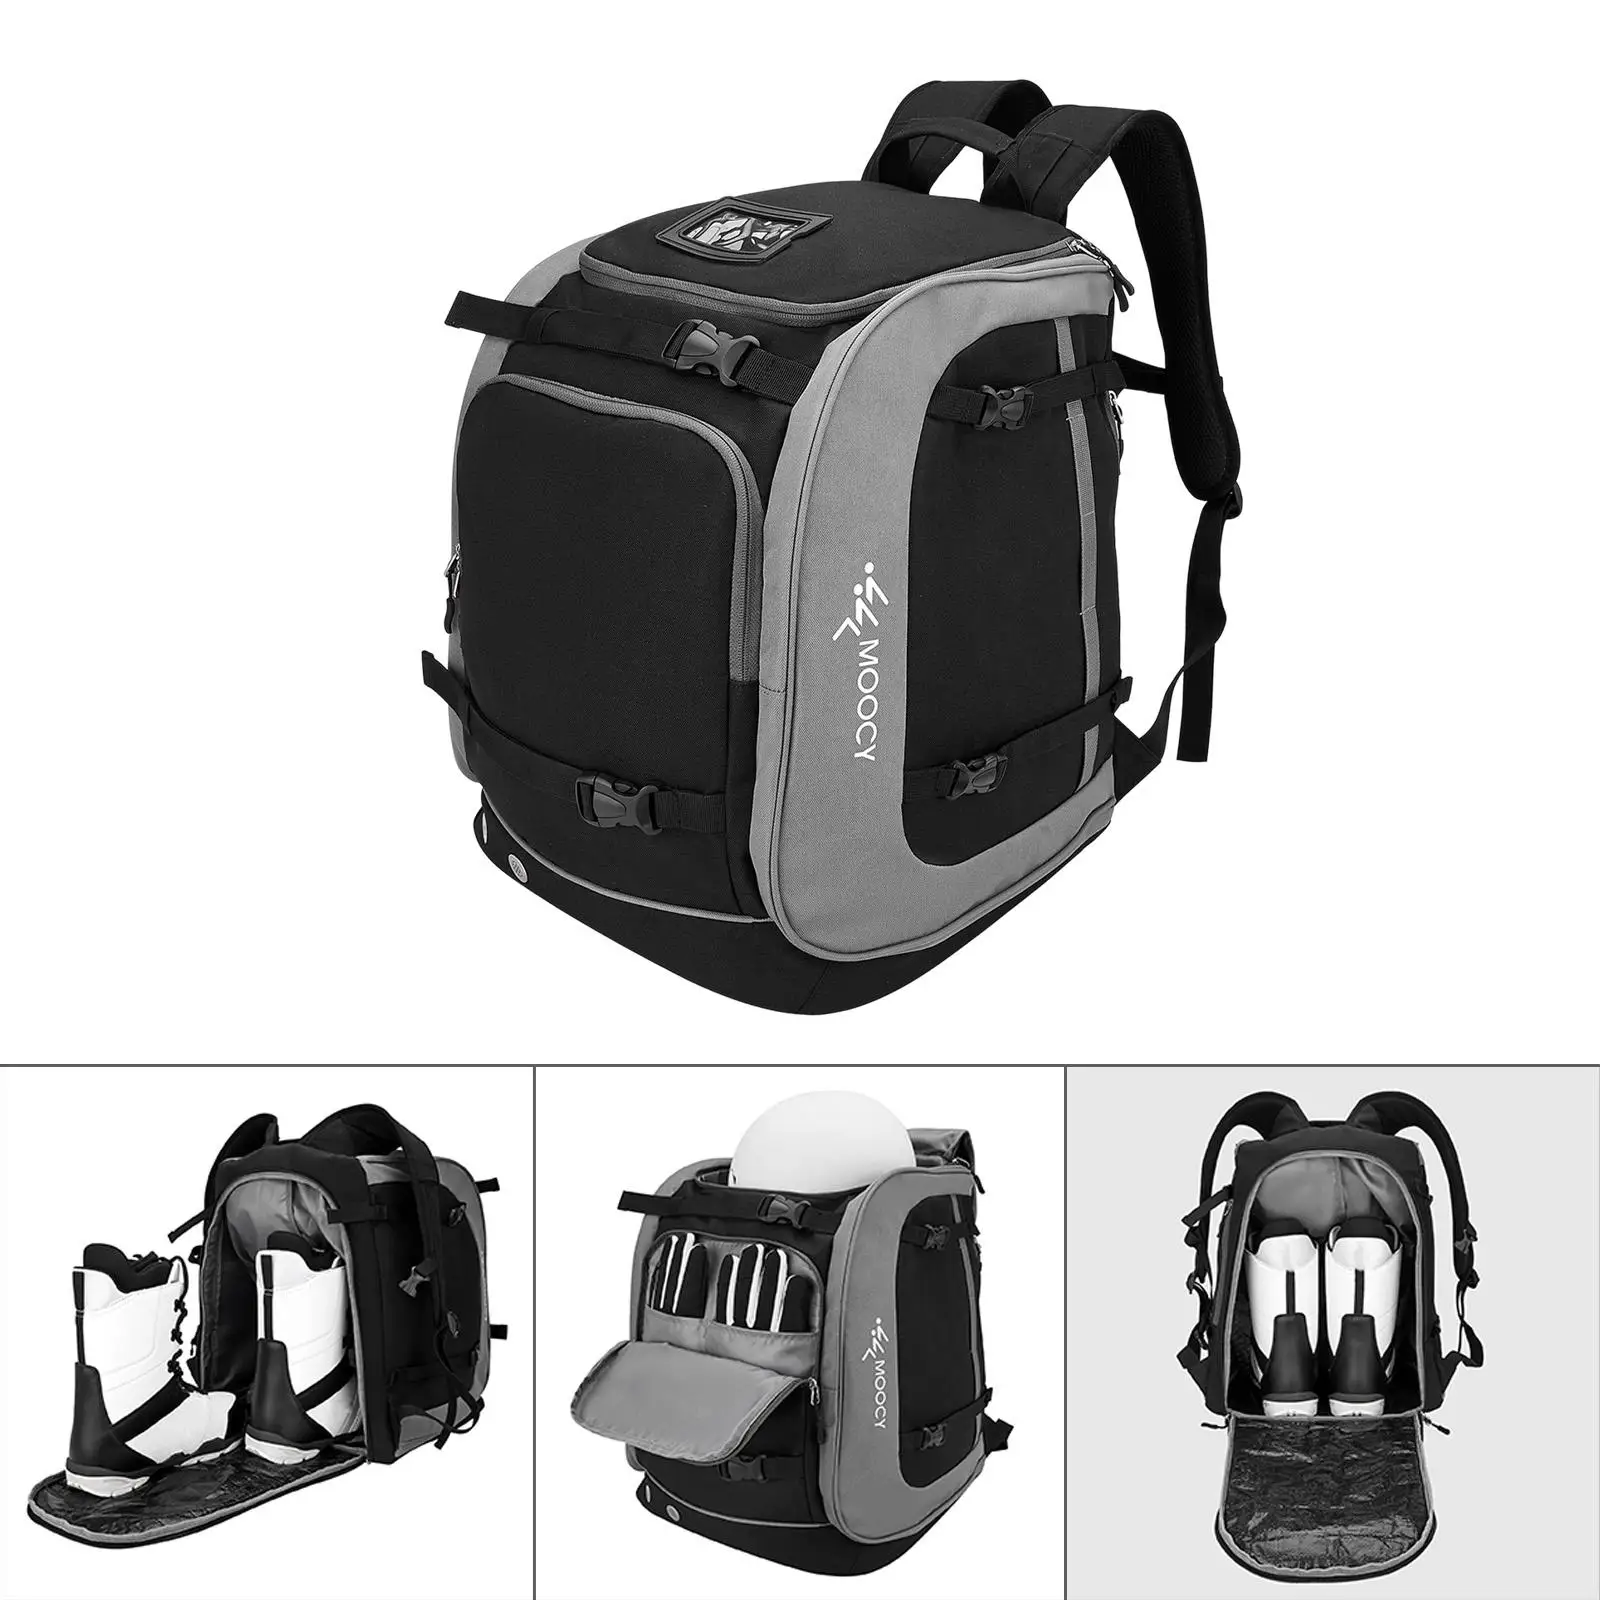 Waterproof 65L Ski Backpack Large Capacity Carrying Bag Oxford Cloth Boot Bag for Jacket Outdoor Travel Gloves Goggles